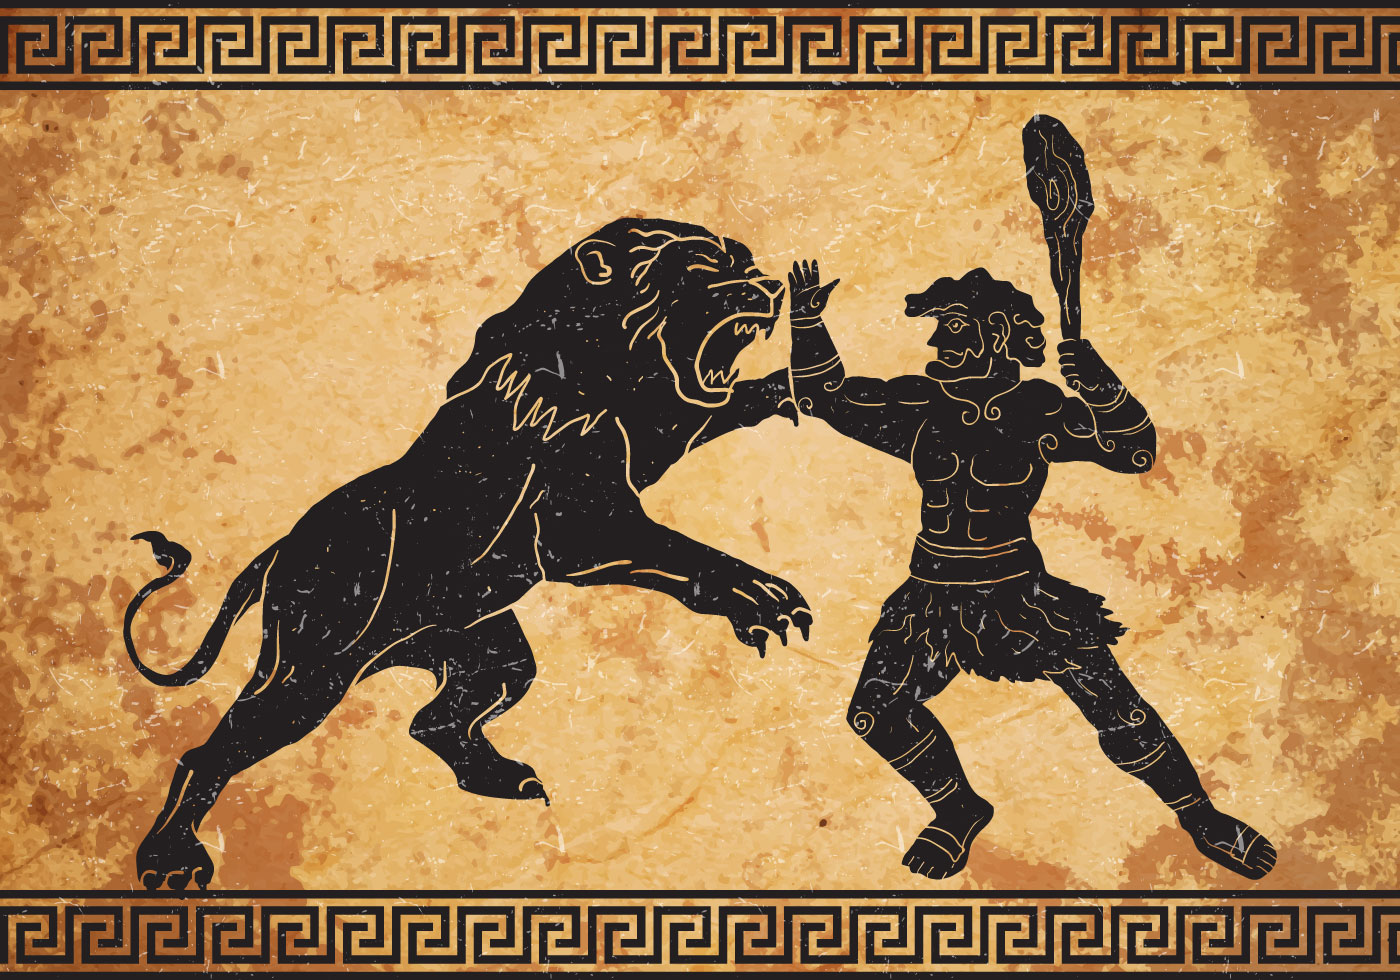 The first labor of Heracles, slaying the nemean lion. 